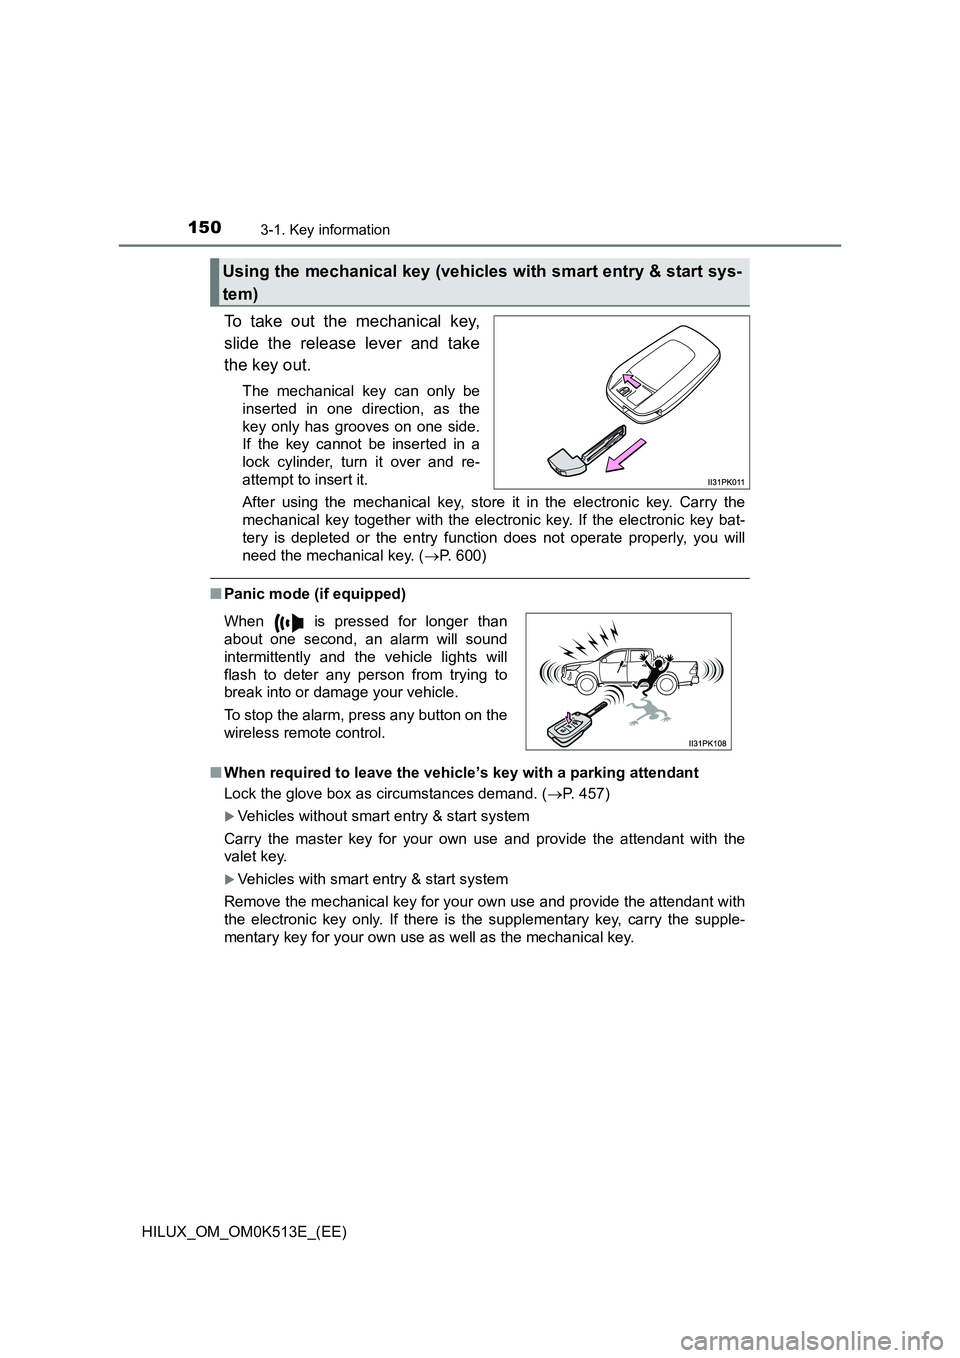 TOYOTA HILUX 2021  Owners Manual (in English) 1503-1. Key information
HILUX_OM_OM0K513E_(EE)
To take out the mechanical key, 
slide the release lever and take 
the key out.
The mechanical key can only be 
inserted in one direction, as the
key onl